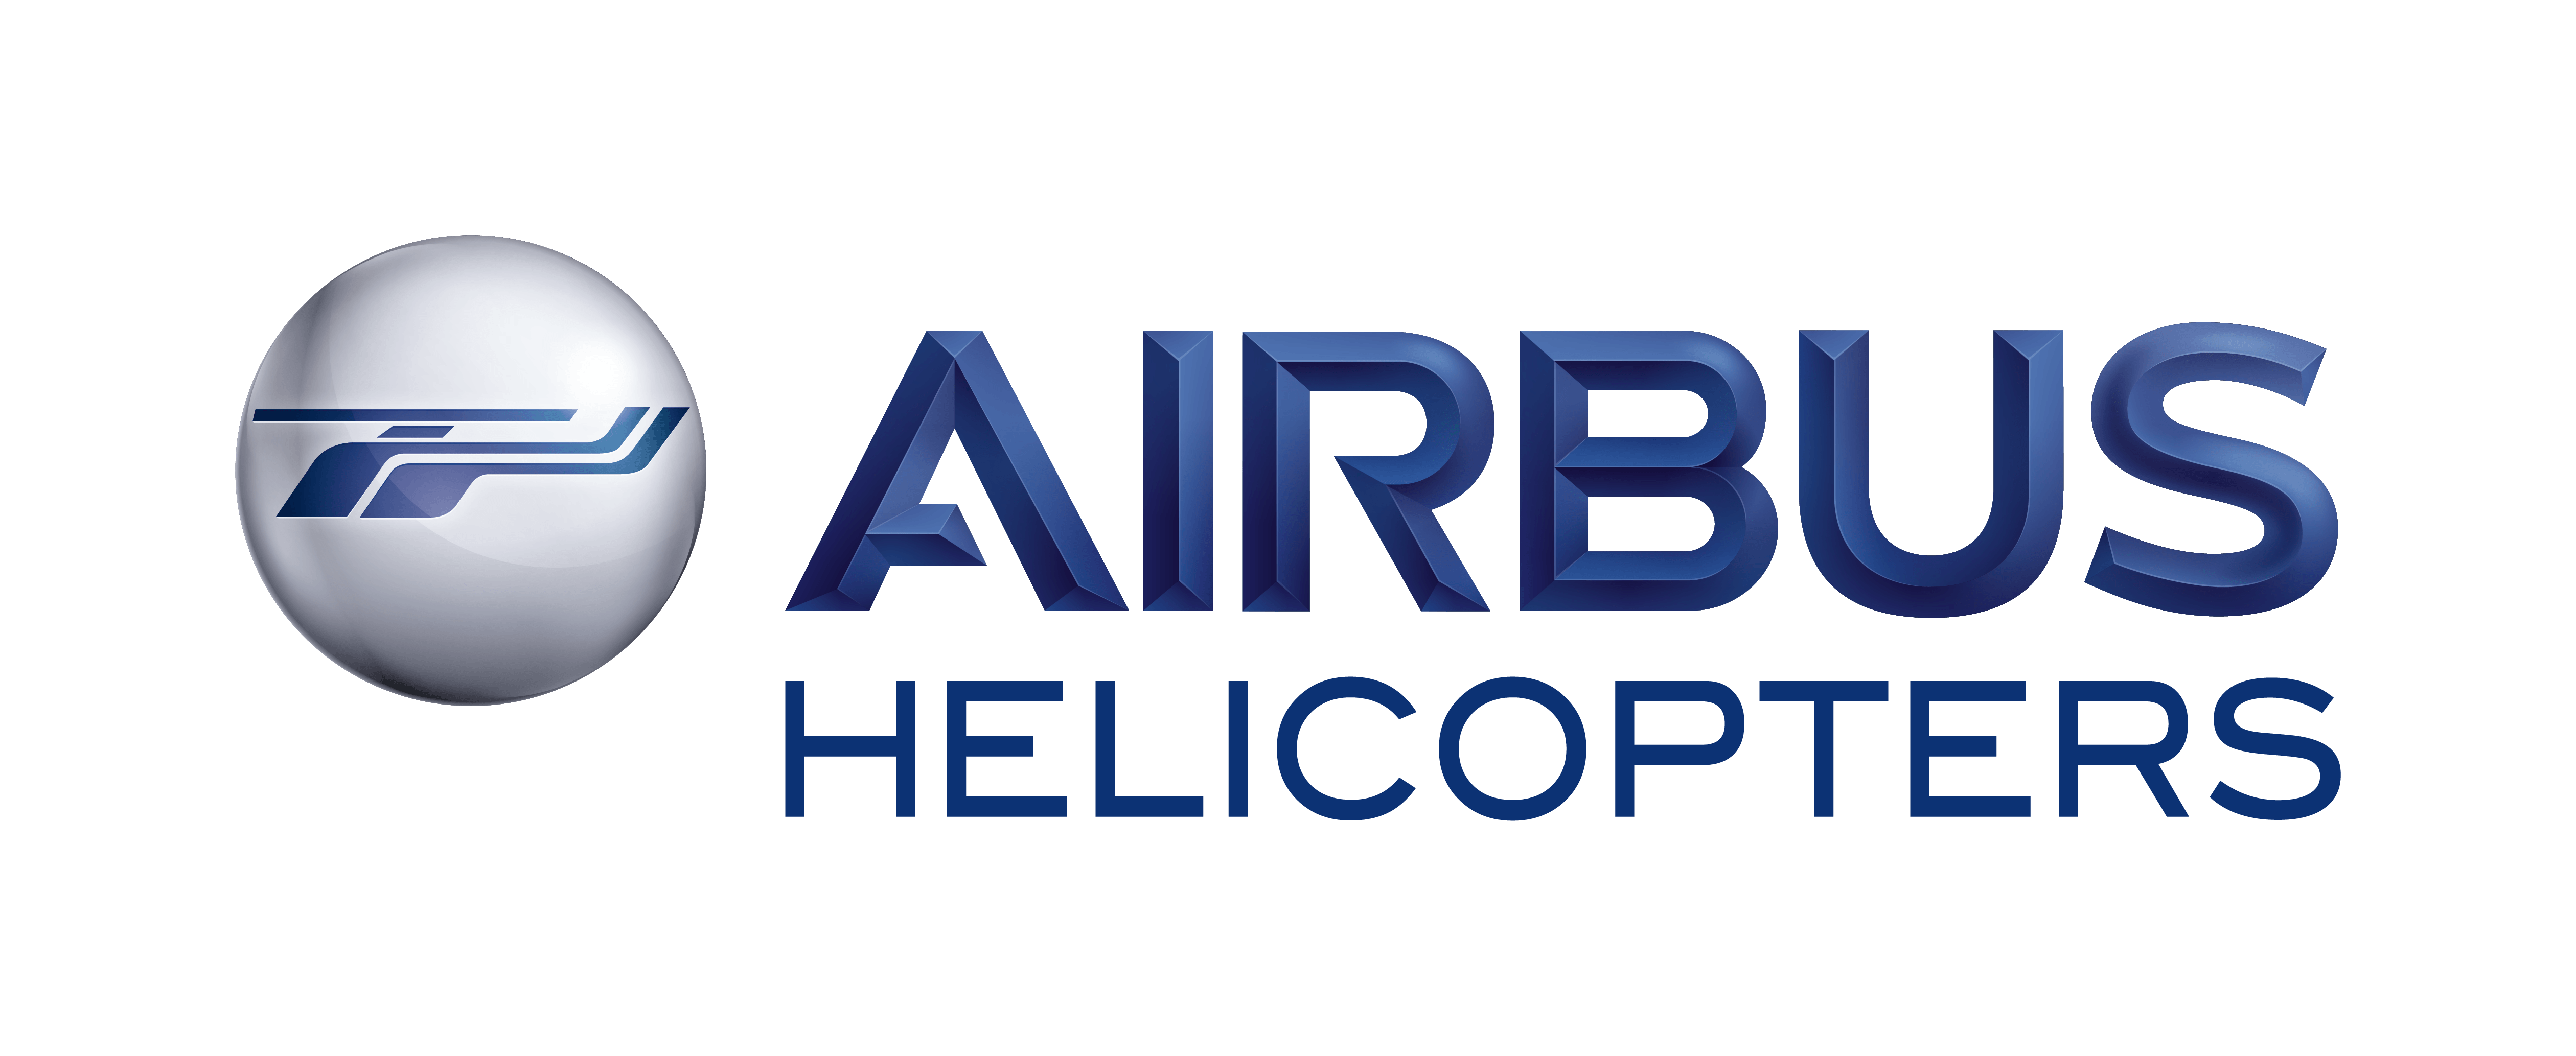 Eurocopter Logo - Airbus Helicopters Logos